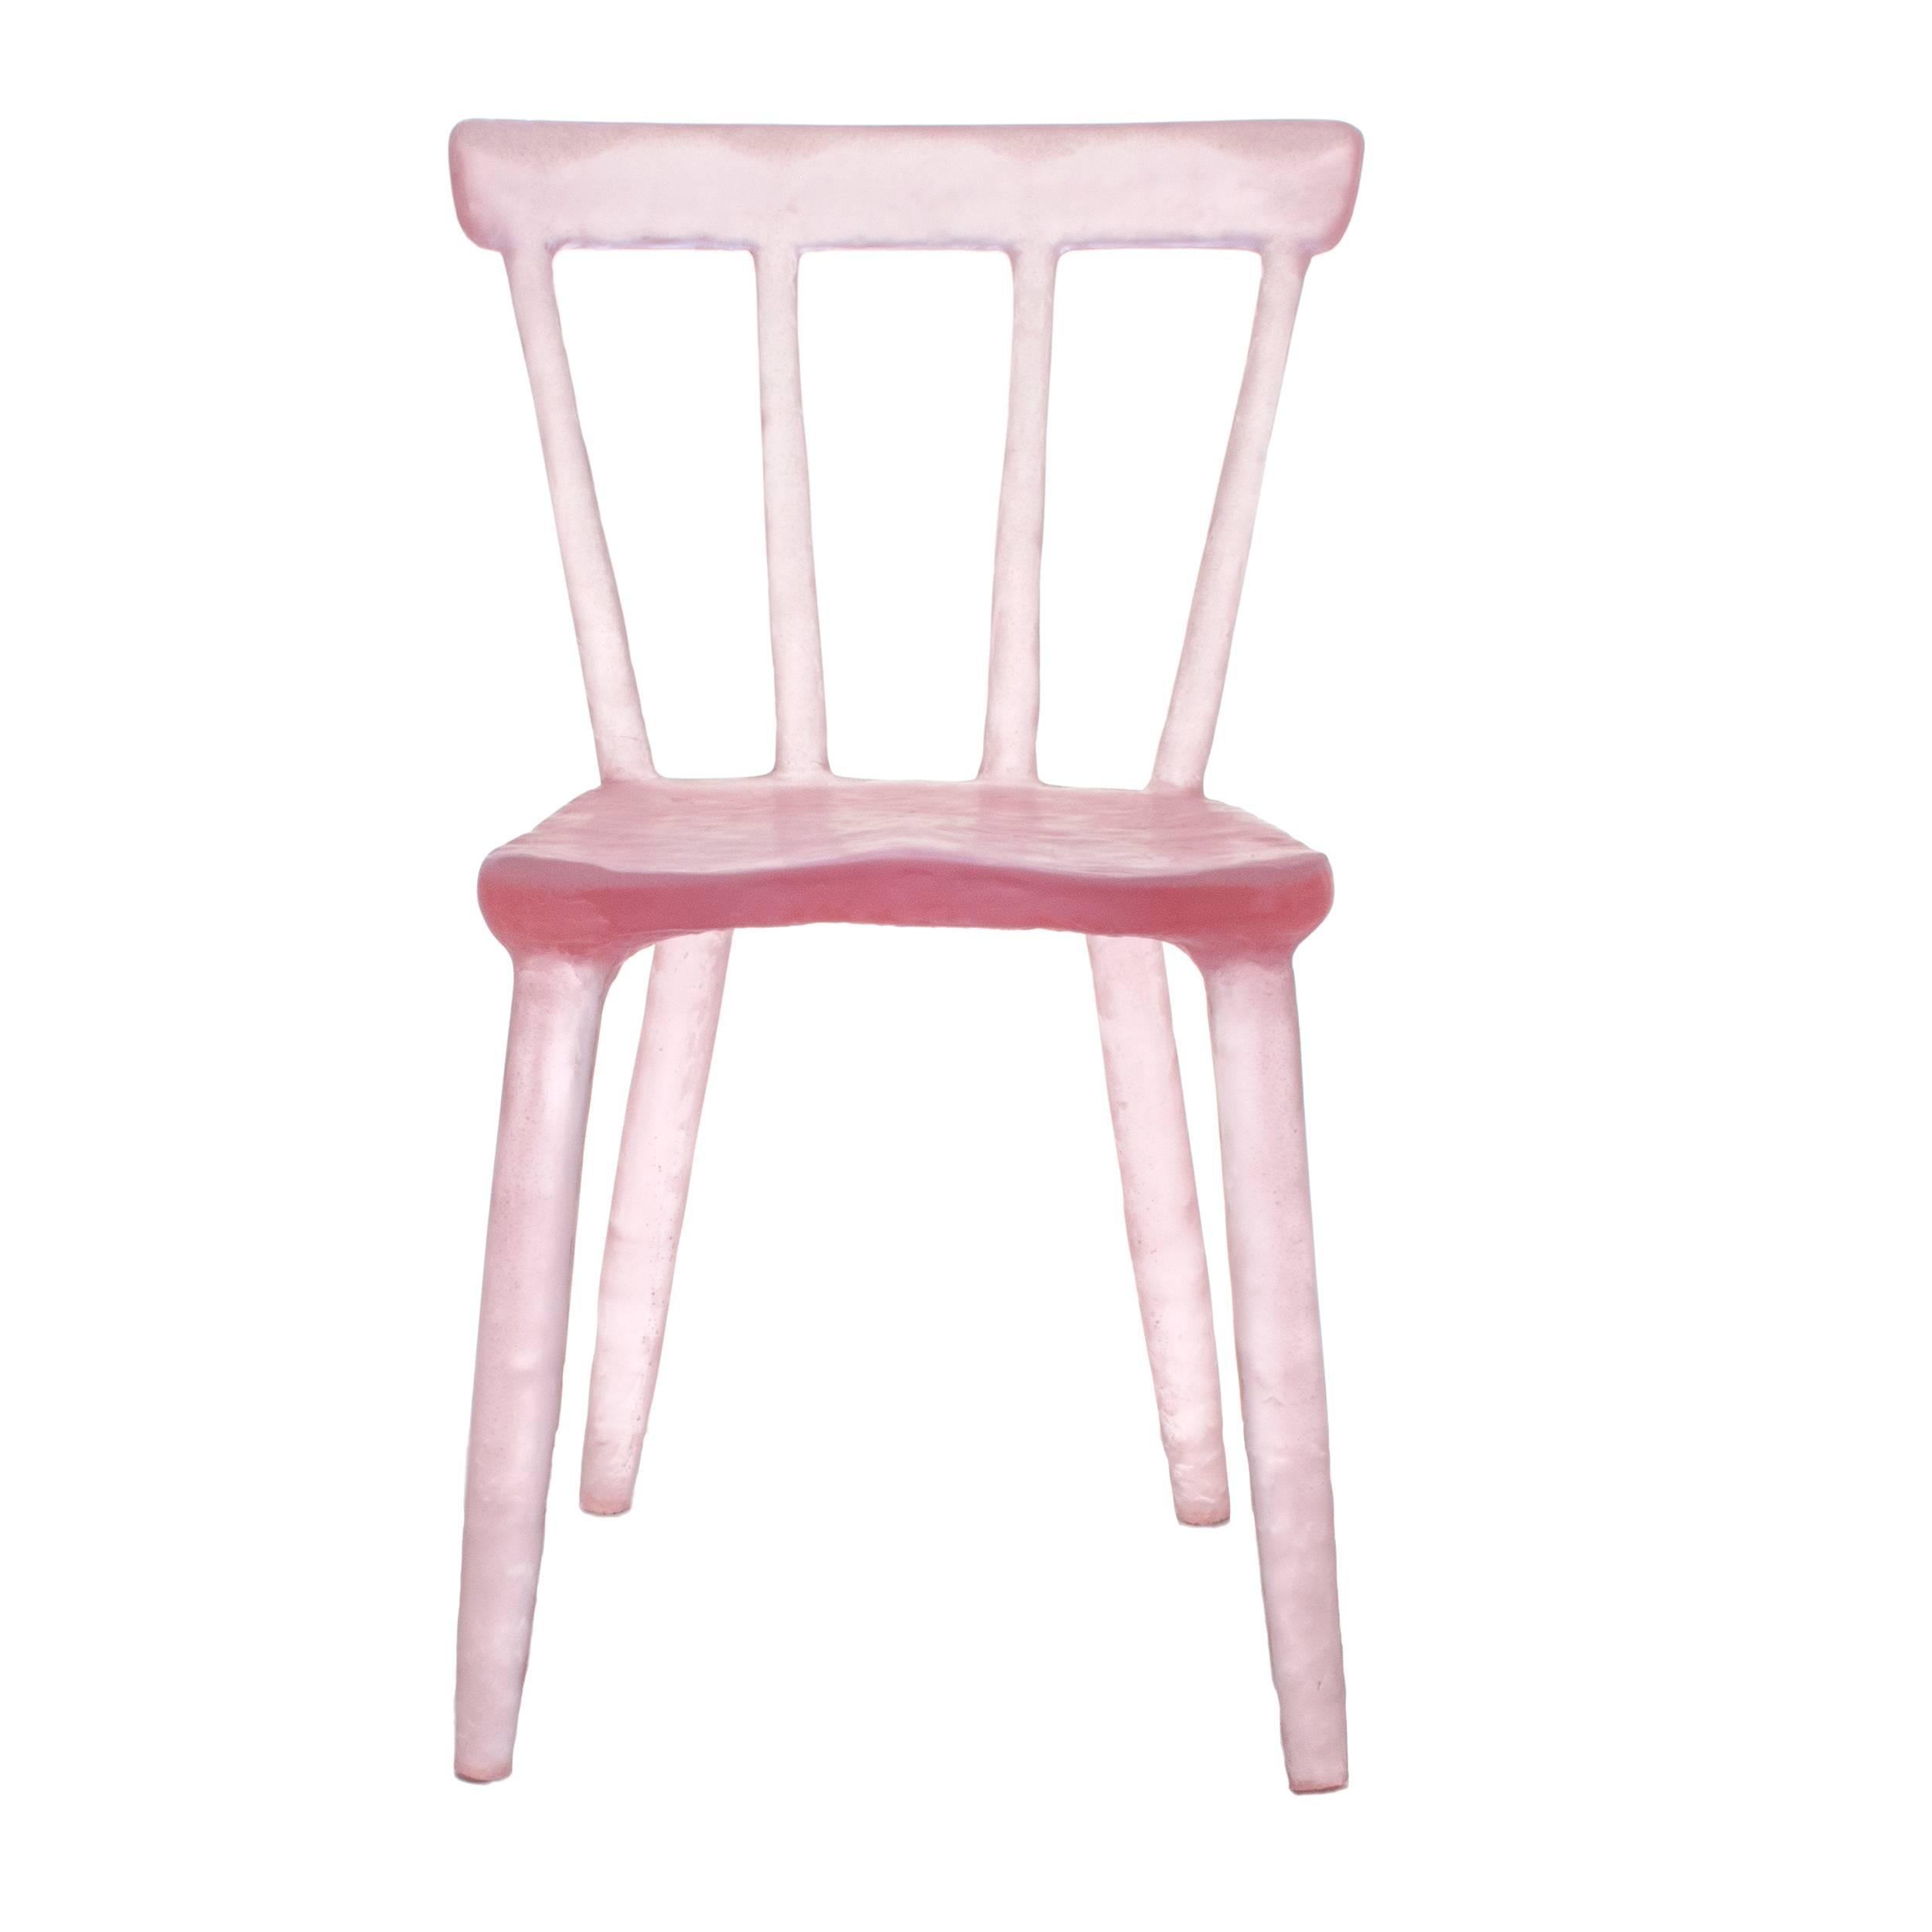 Glow Chair by Kim Markel in Pink, Handmade from Cast Recycled Resin / Acrylic For Sale